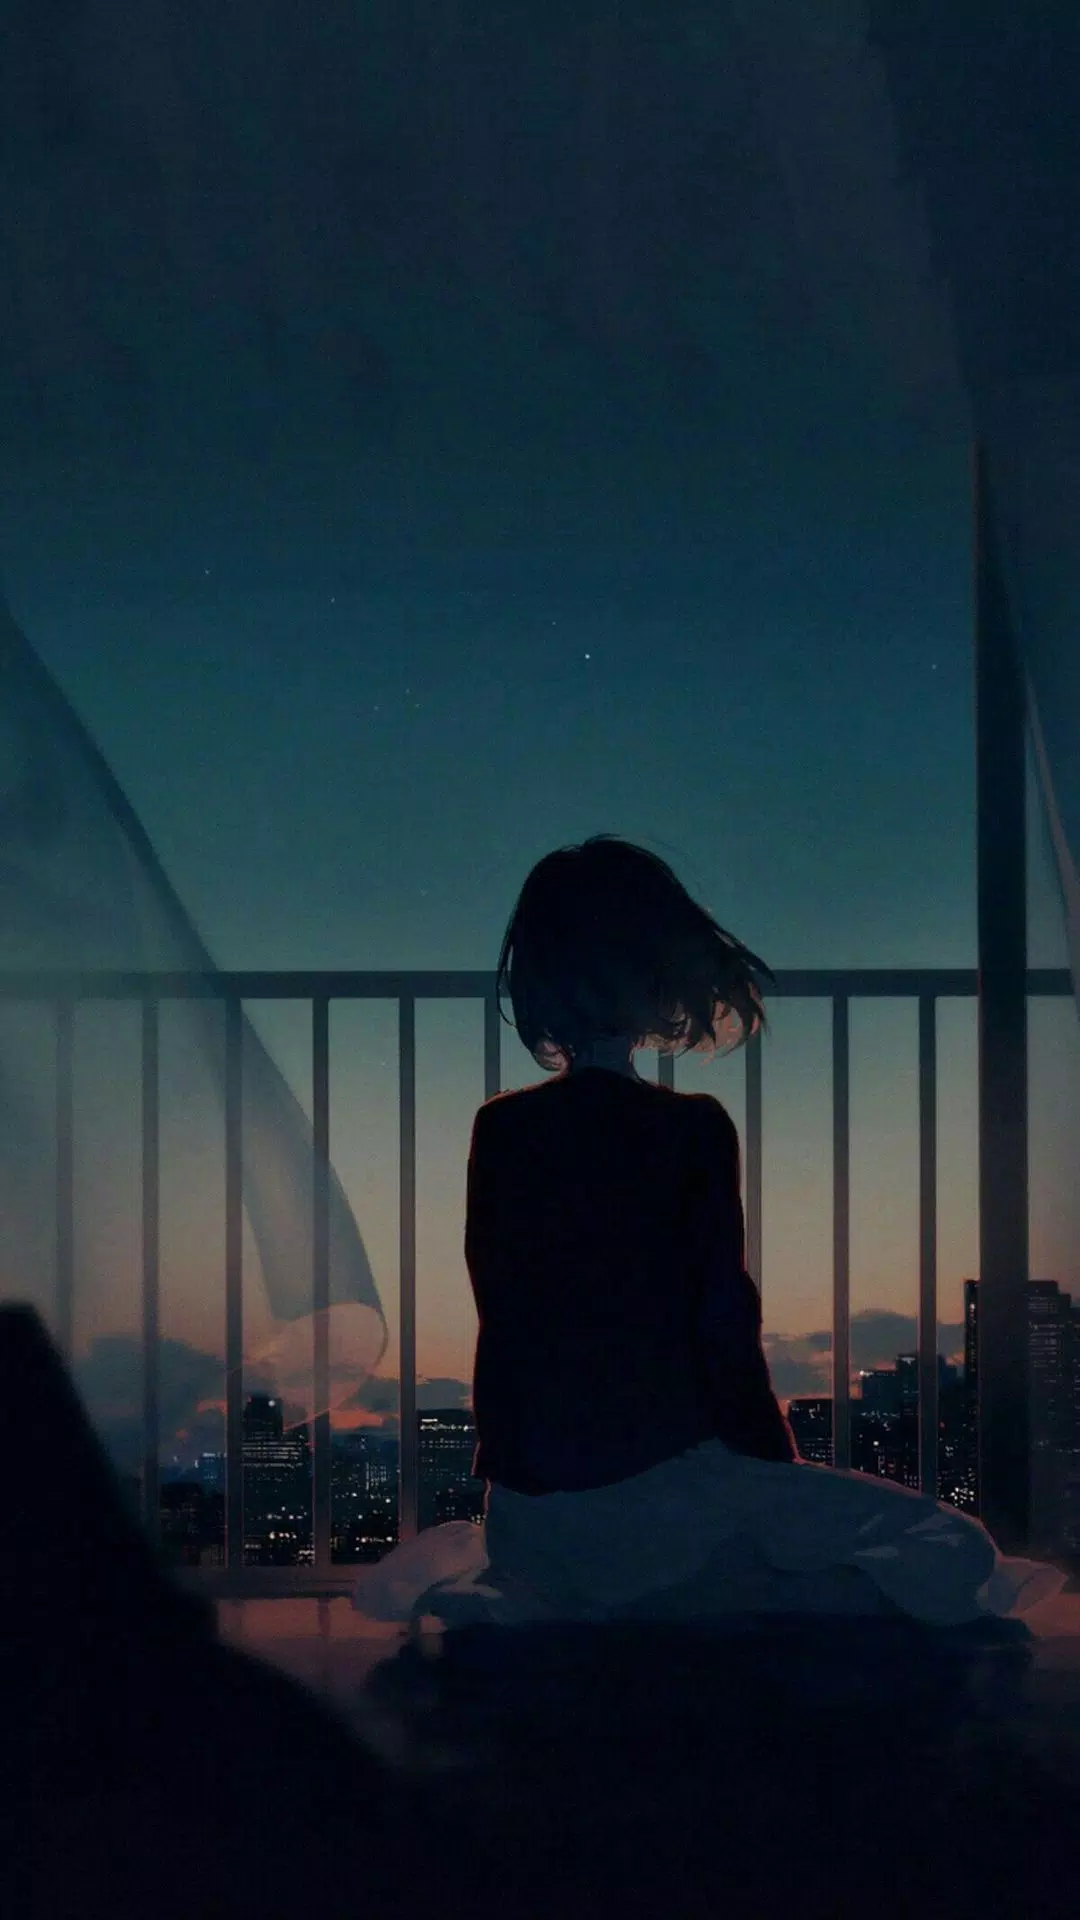 A woman sitting on a balcony at night looking at the stars - Depressing